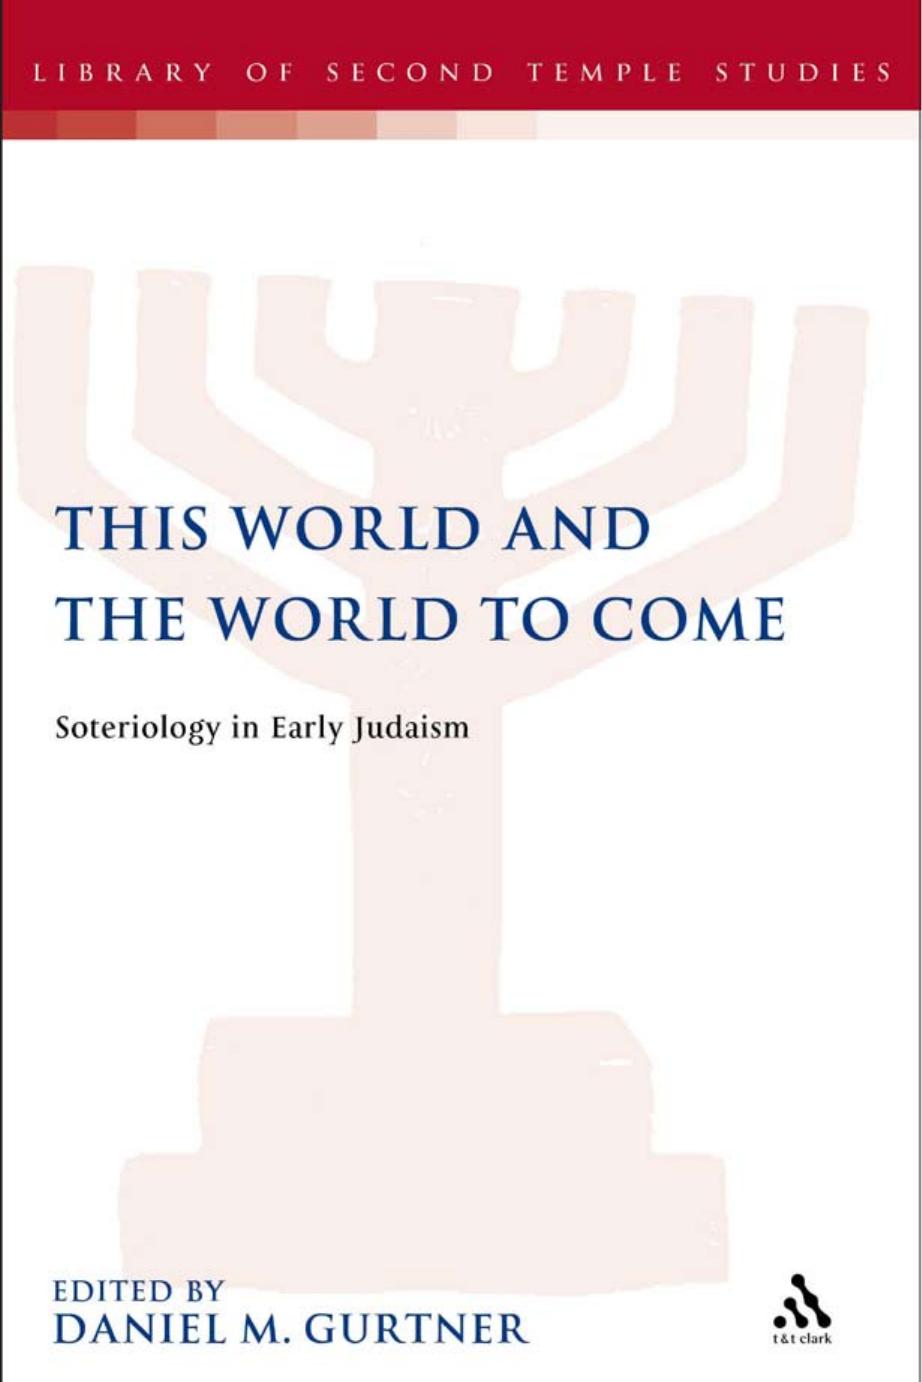 This World and the World to Come: Soteriology in Early Judaism by Daniel M. Gurtner (editor)